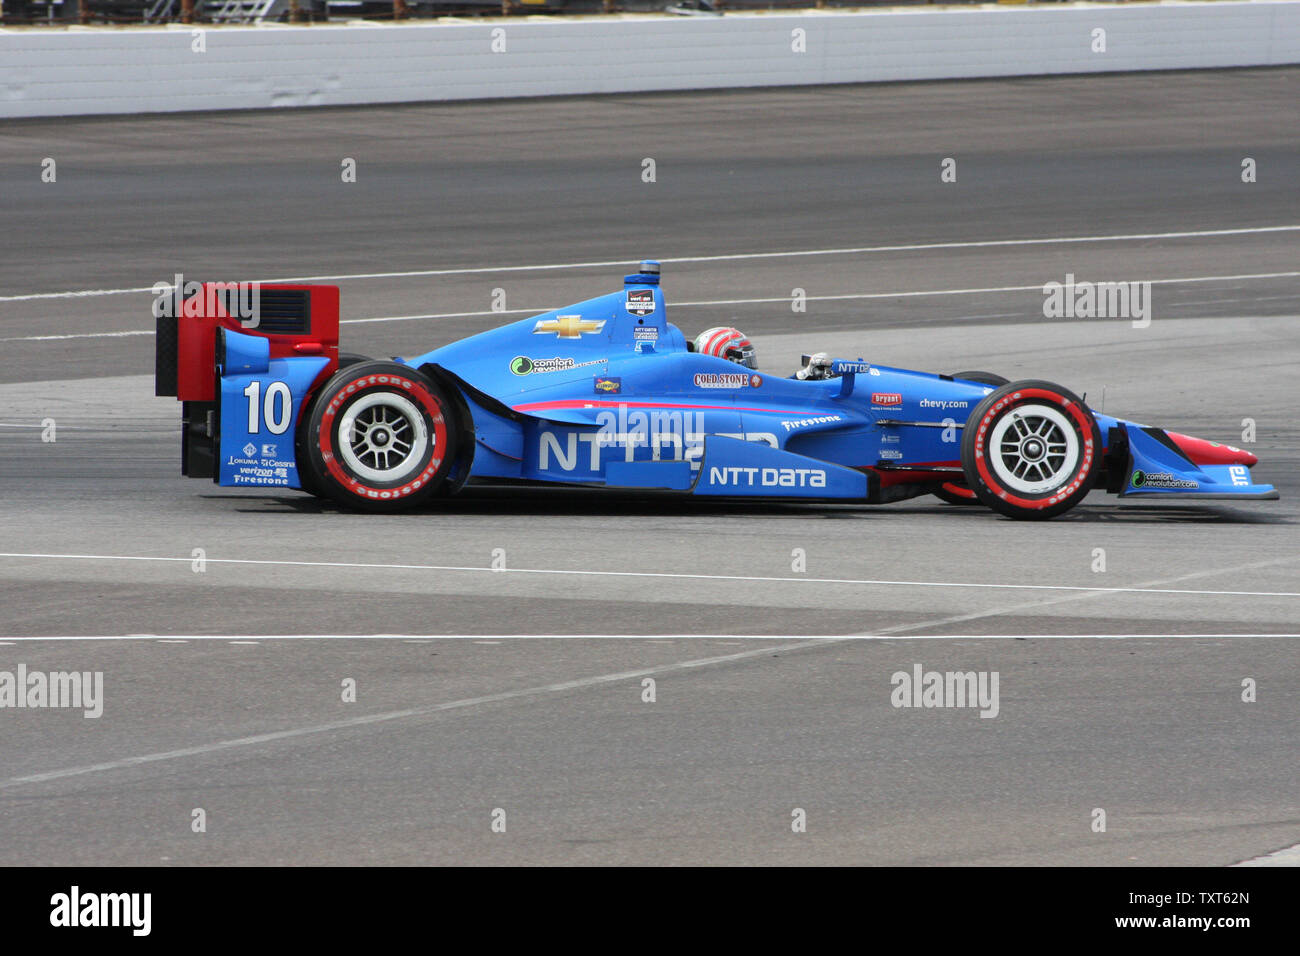 Tony Kanaan, driving for a Chip Ganassi racing team, comes out of turn one during Grand Prix of Indianapolis qualifying at the Indianapolis Motor Speedway  on May 9, 2015 in Indianapolis, In. Power won the pole. Photo by Bill Coons/UPI Stock Photo